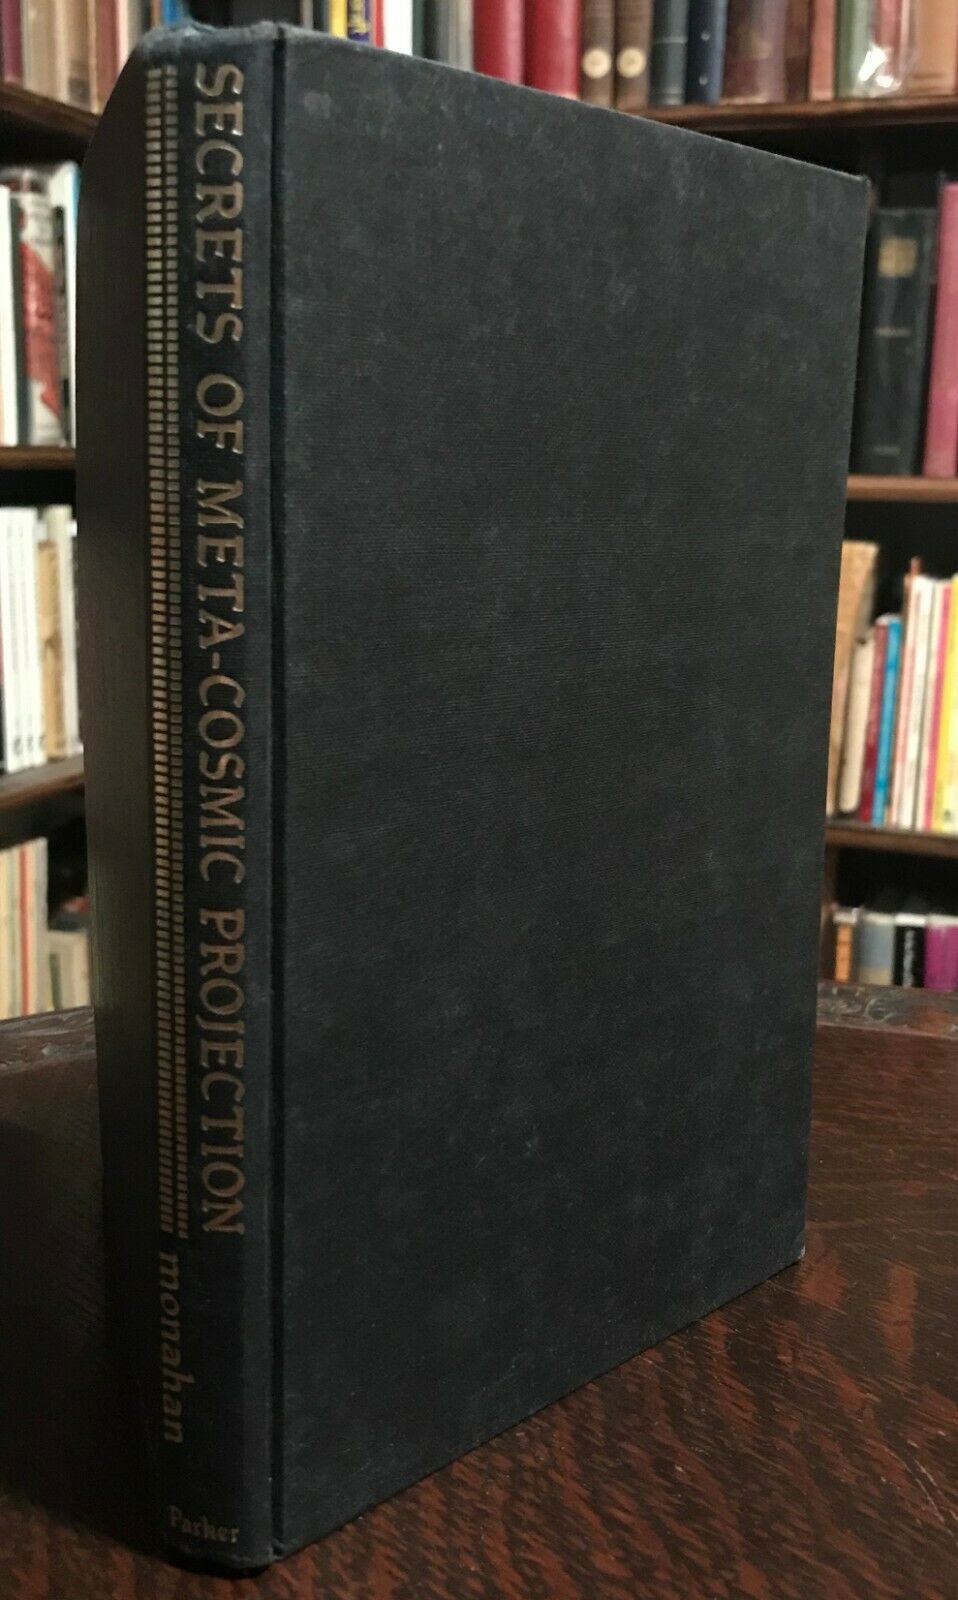 SECRETS OF META-COSMIC PROJECTION, Monahan, 1st Ed 1977 - OCCULT MANIFESTATIONS